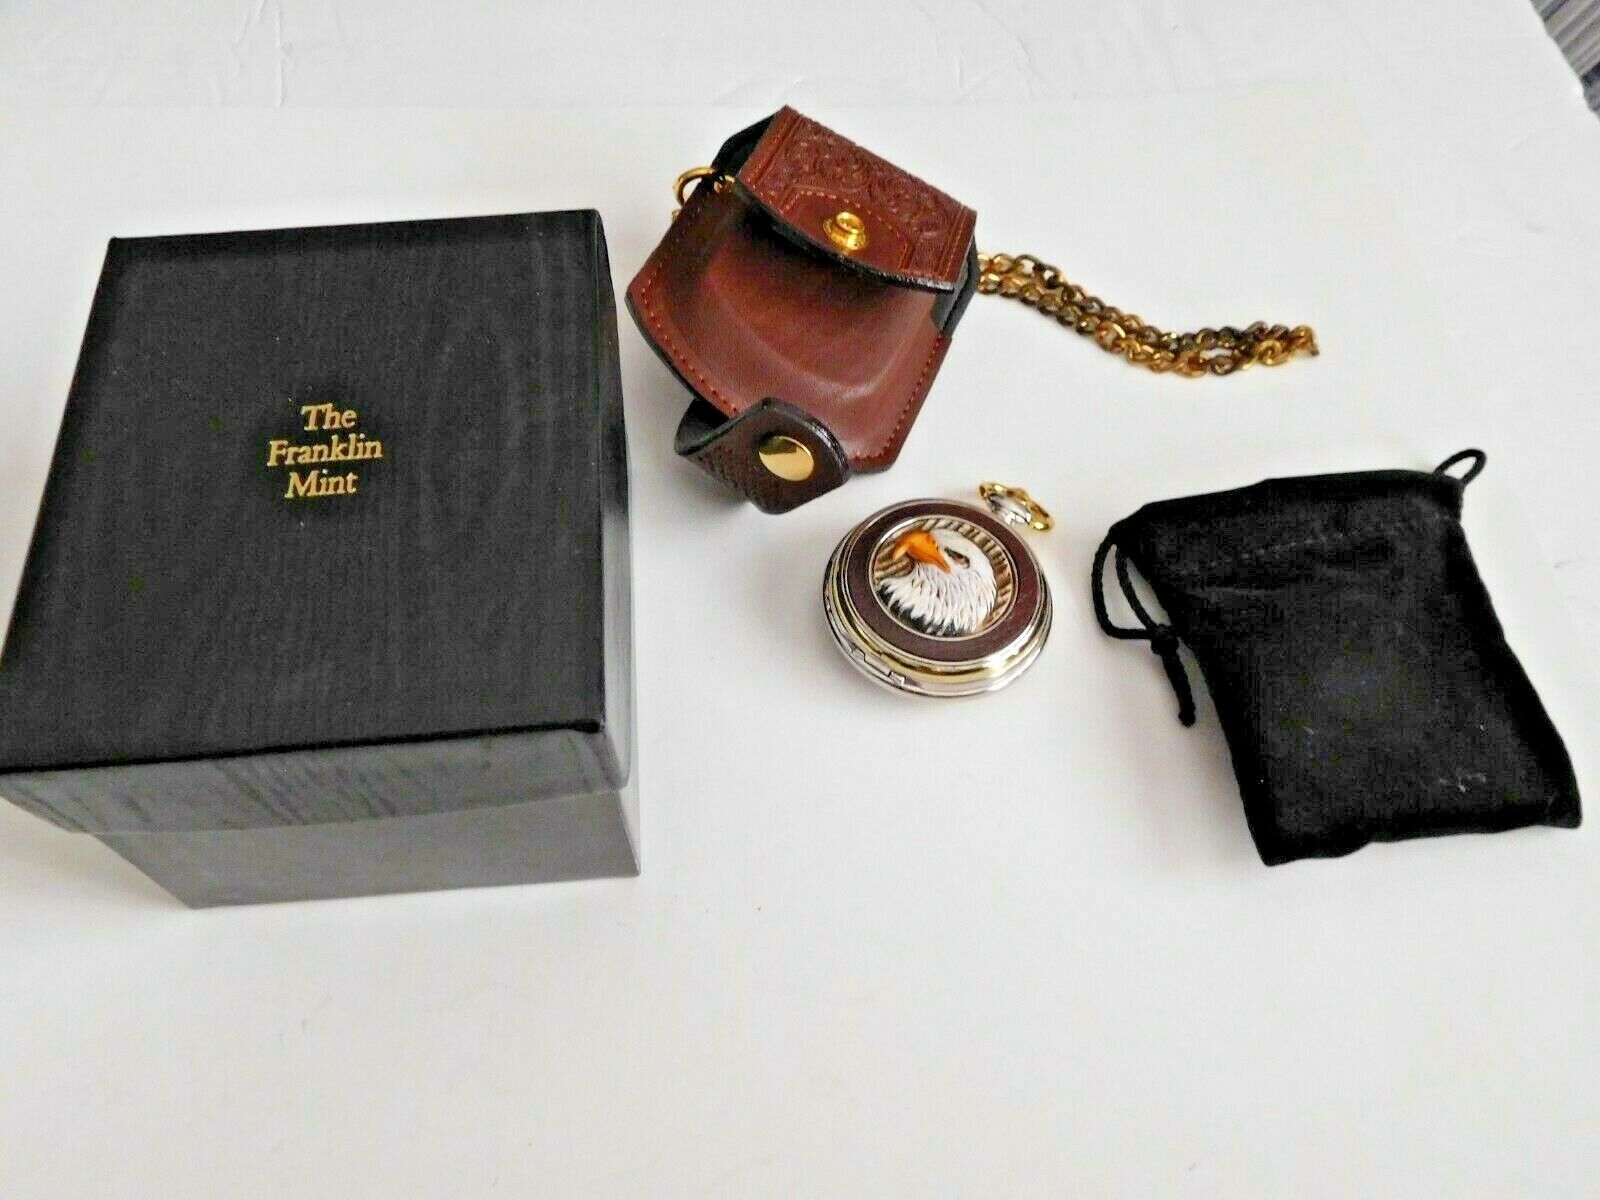 New Franklin Mint Pocket watch, complete in gift box